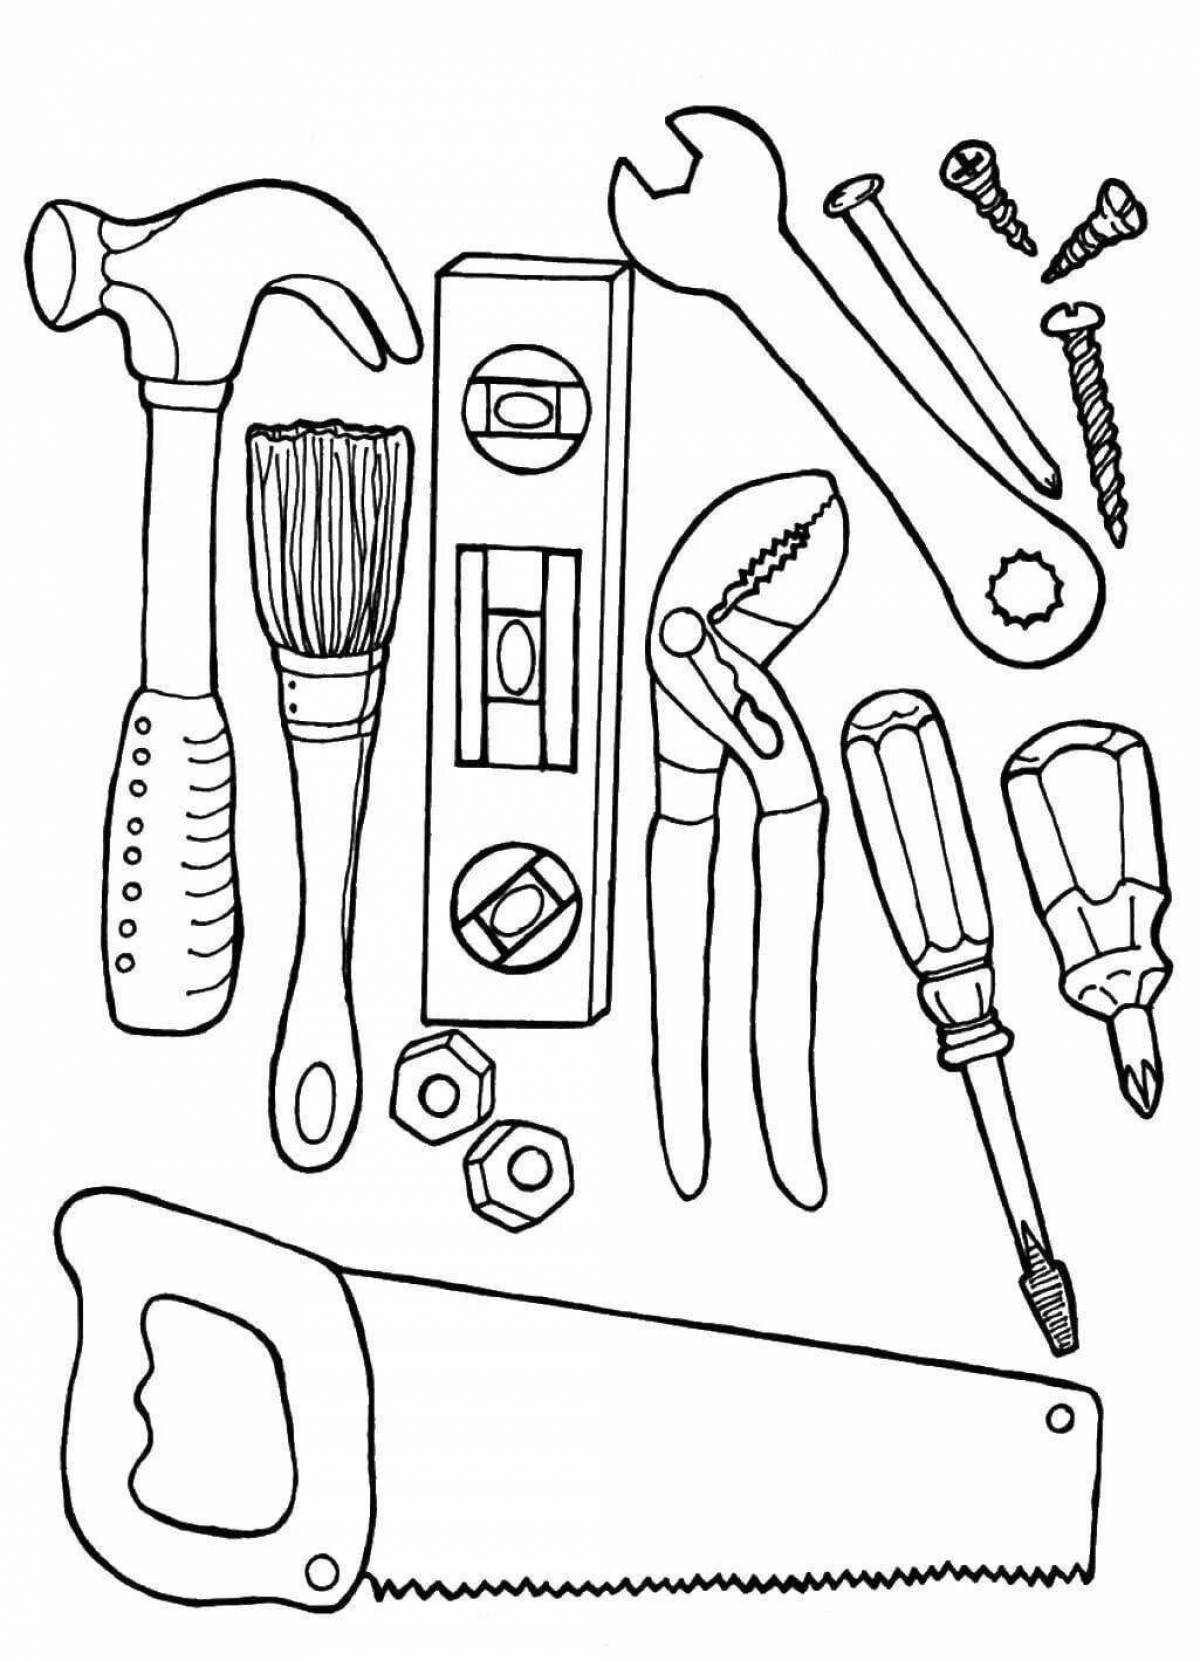 Tools for kids #17